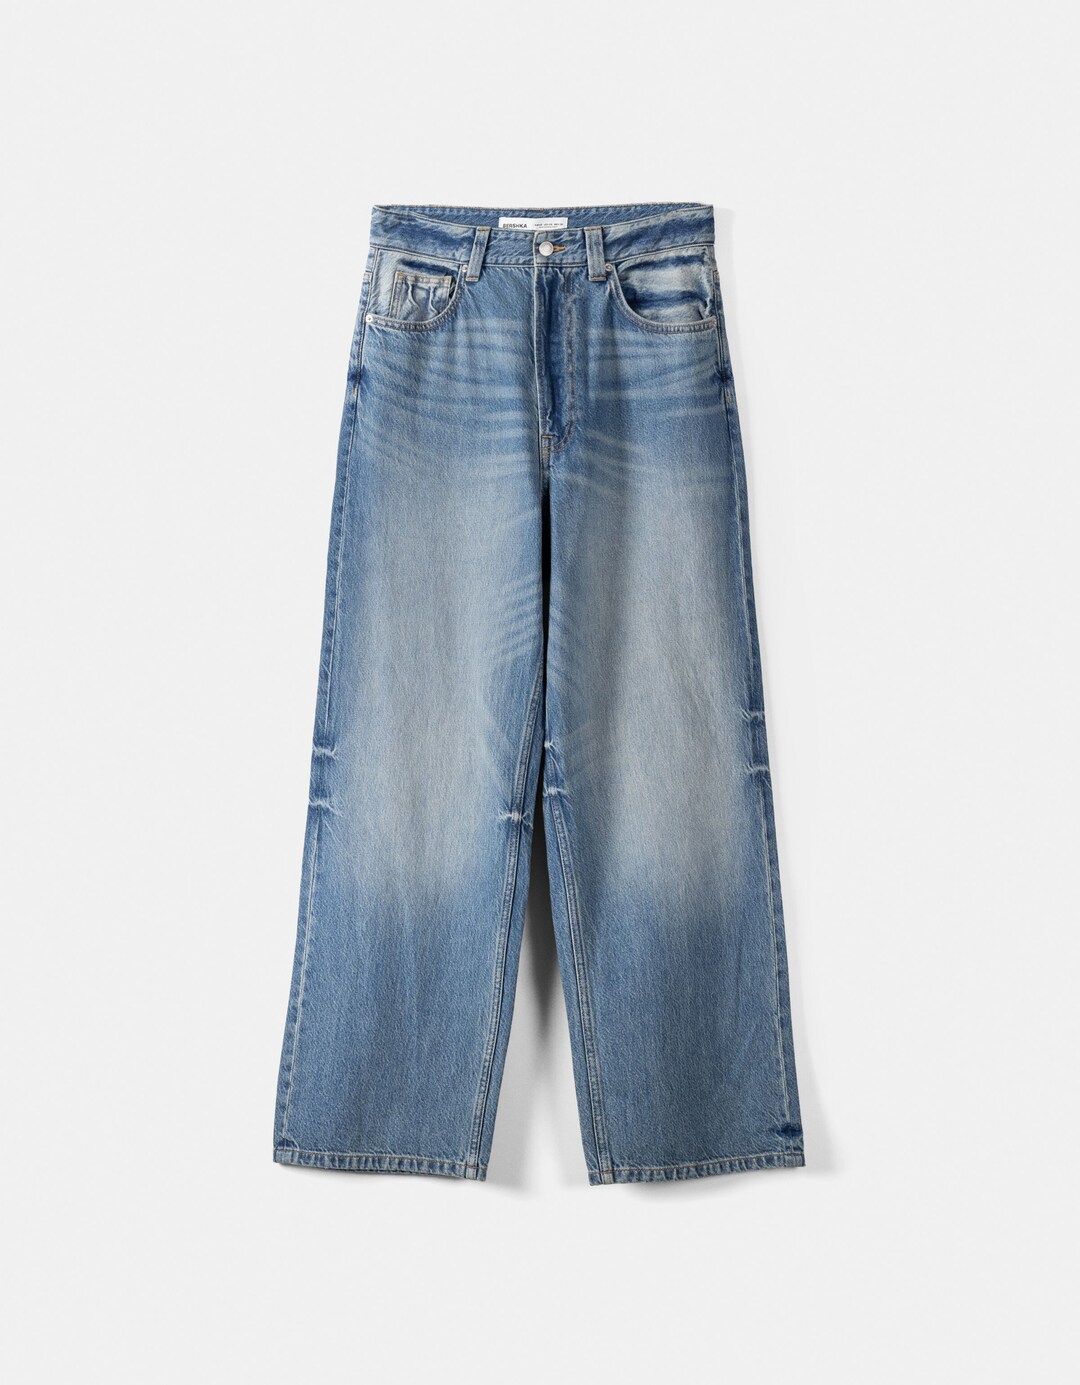 Superbaggy jeans